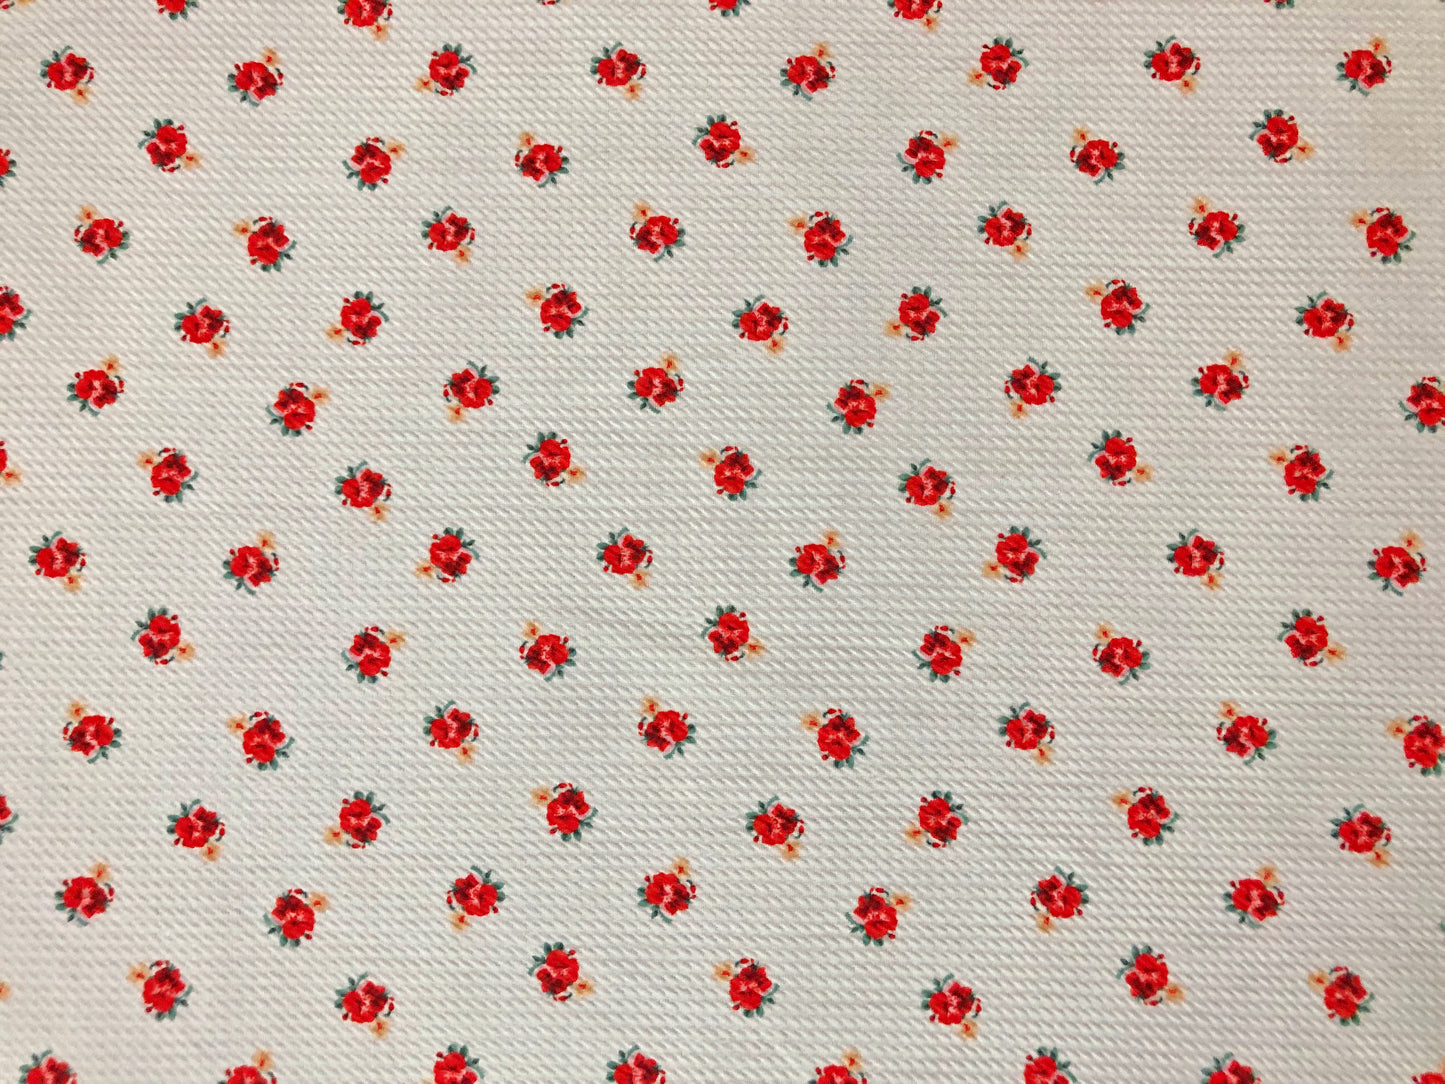 Bullet Knit Printed Fabric-Ivory Red Roses-BPR263-Sold by the Yard